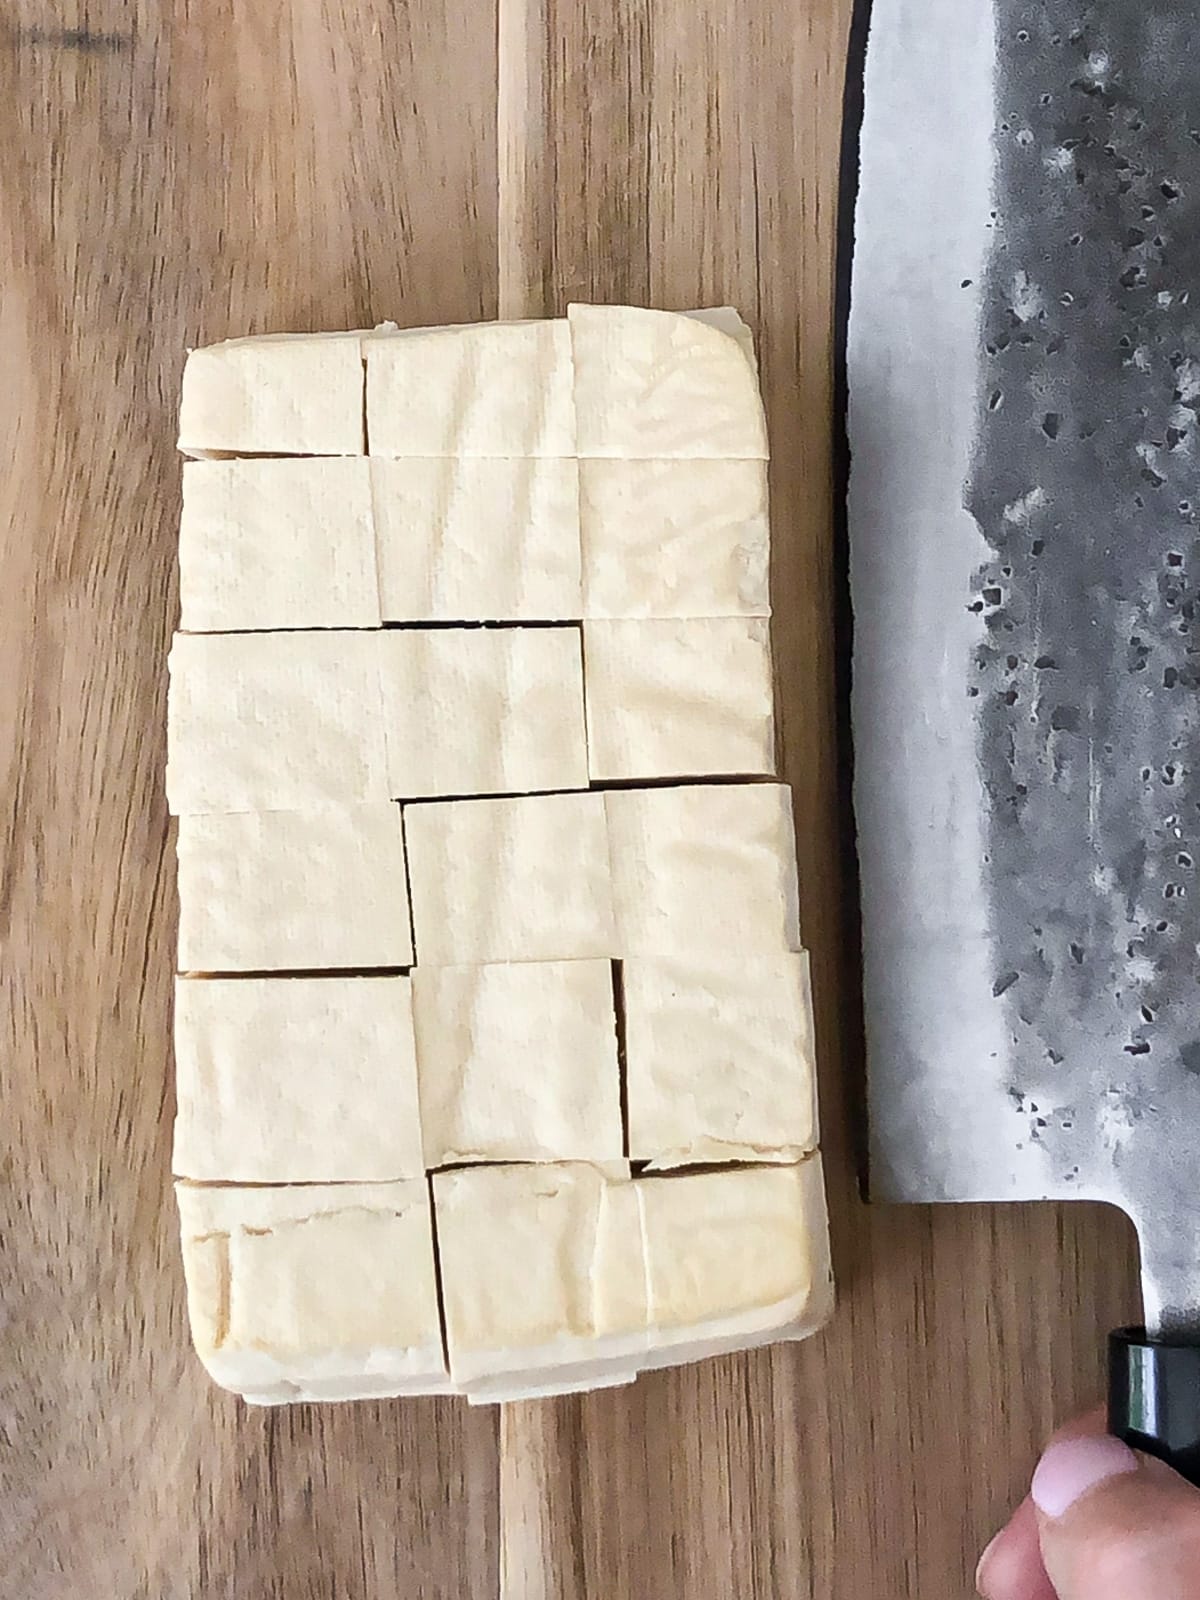 A block of tofu cut into a grid of cubes sitting on a cutting board.